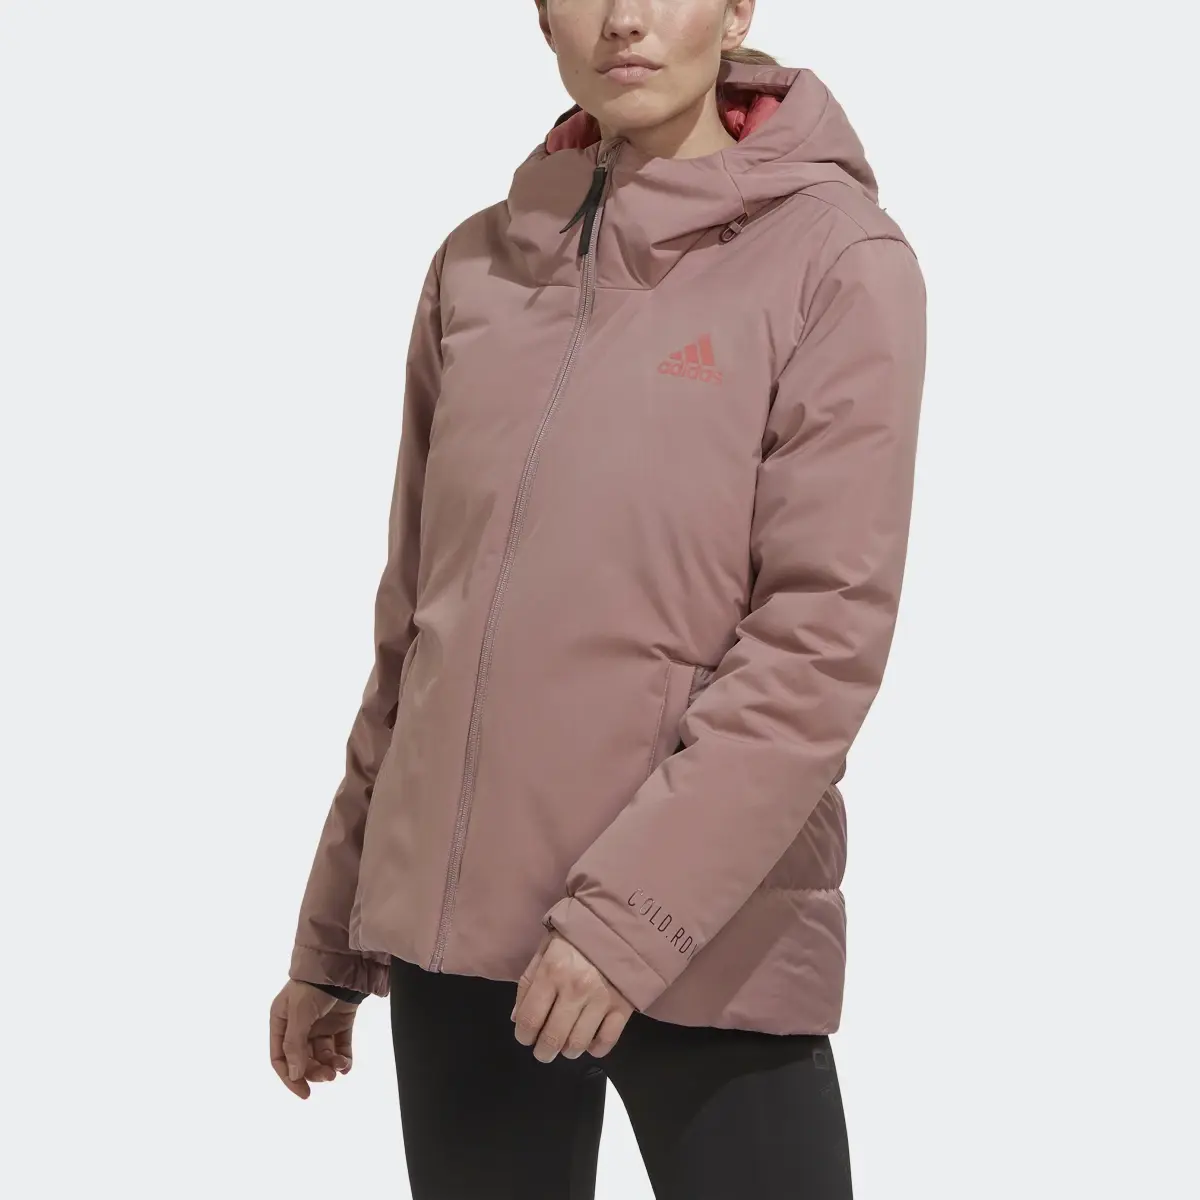 Adidas Traveer COLD.RDY Jacket. 1